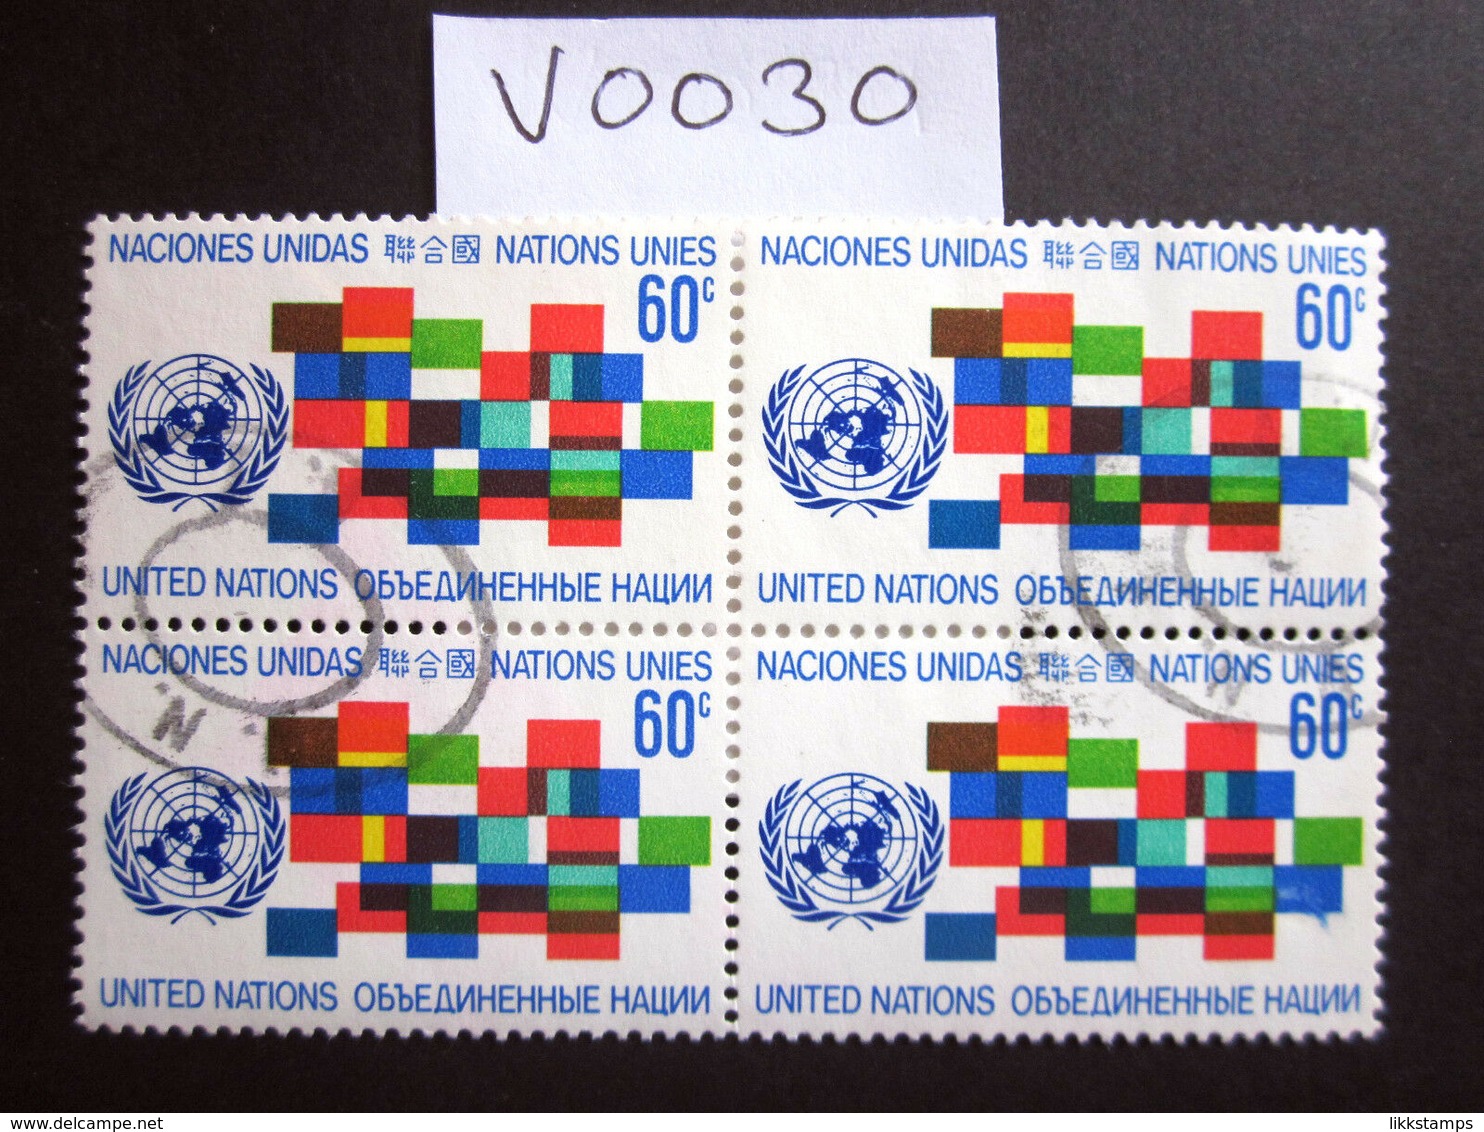 1971 A FINE USED BLOCK OF 4 "SG 223" PICTORIAL UNITED NATIONS USED STAMPS ( V0030 ) #00358 - Lots & Serien